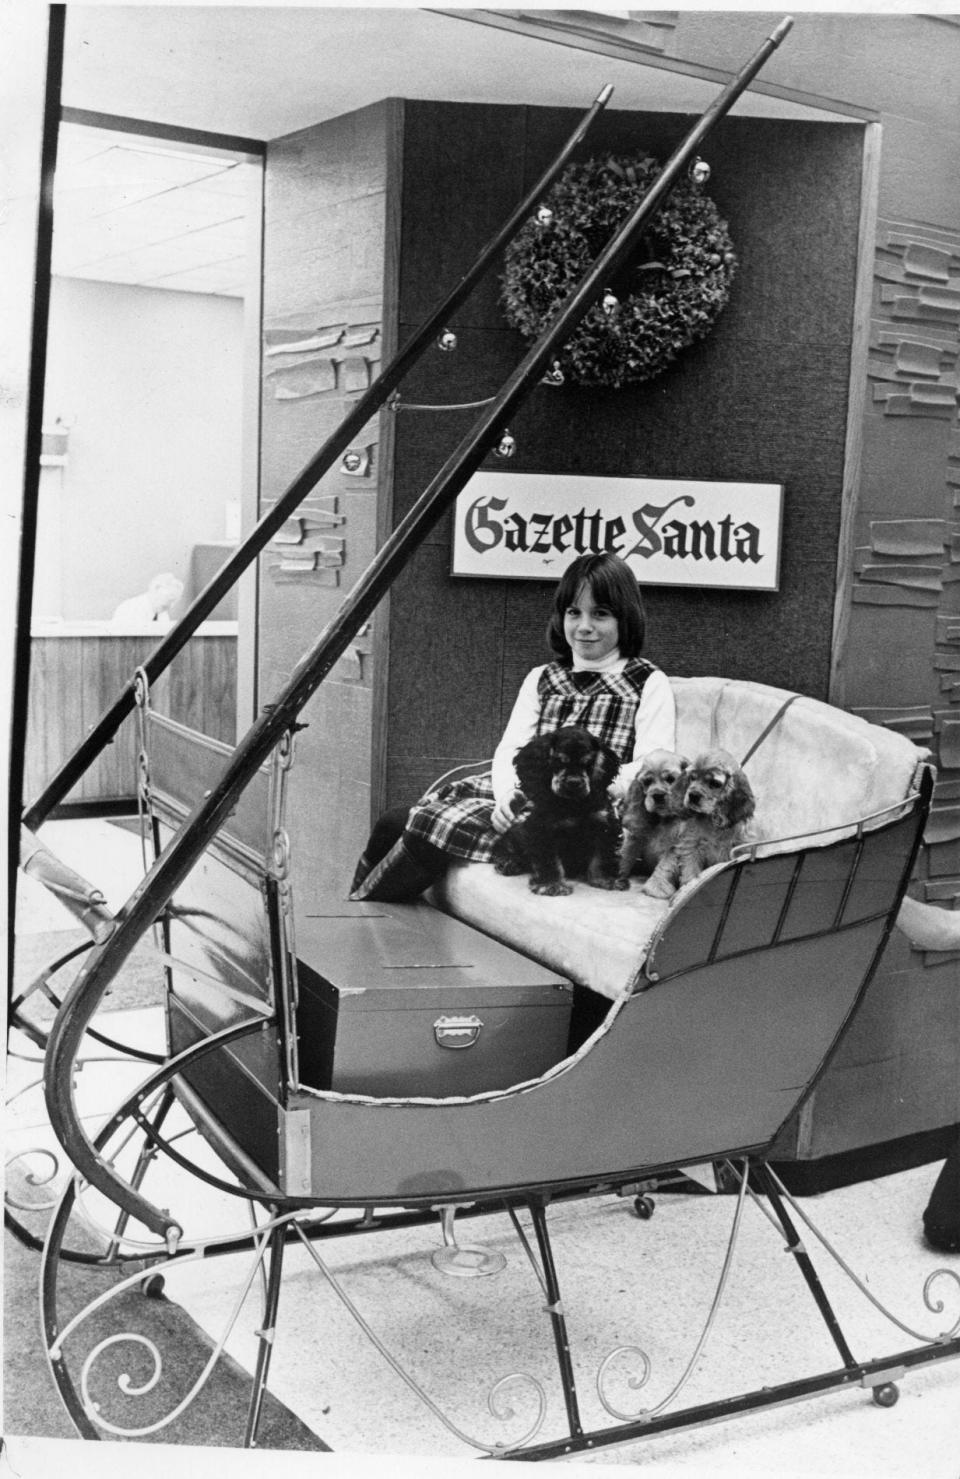 The sleigh was a familiar sight each holiday, set up in the lobby of the former home of the Telegram & Gazette at 20 Franklin St. Often a picture was taken when people dropped off a donation. Pictured in 1978 is Kimberly Thayer of Princeton (and friends), who dropped off a donation from the Worcester County Kennel Club.